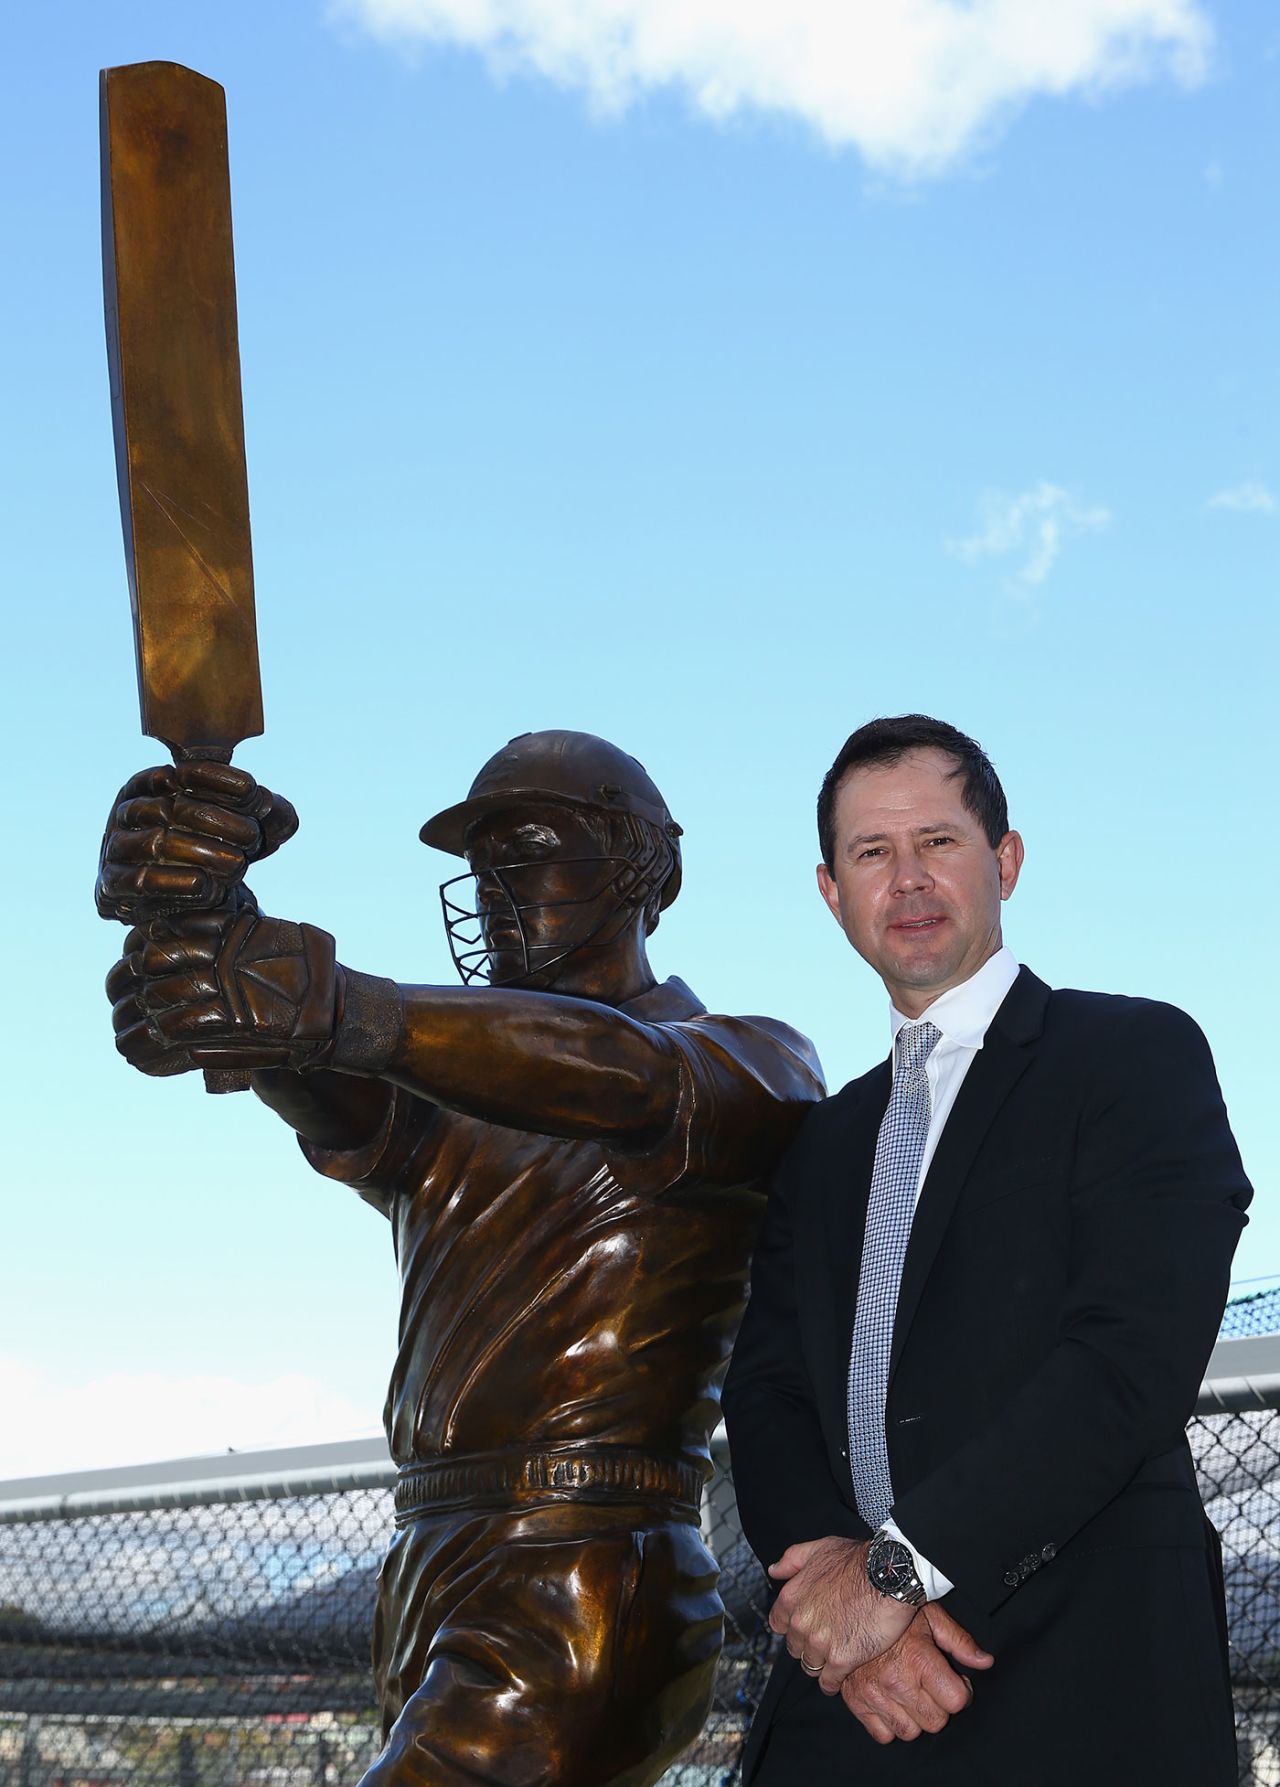 Ricky Ponting with a newly unveiled statue of himself, Bellerive Oval, Hobart, December 9, 2015